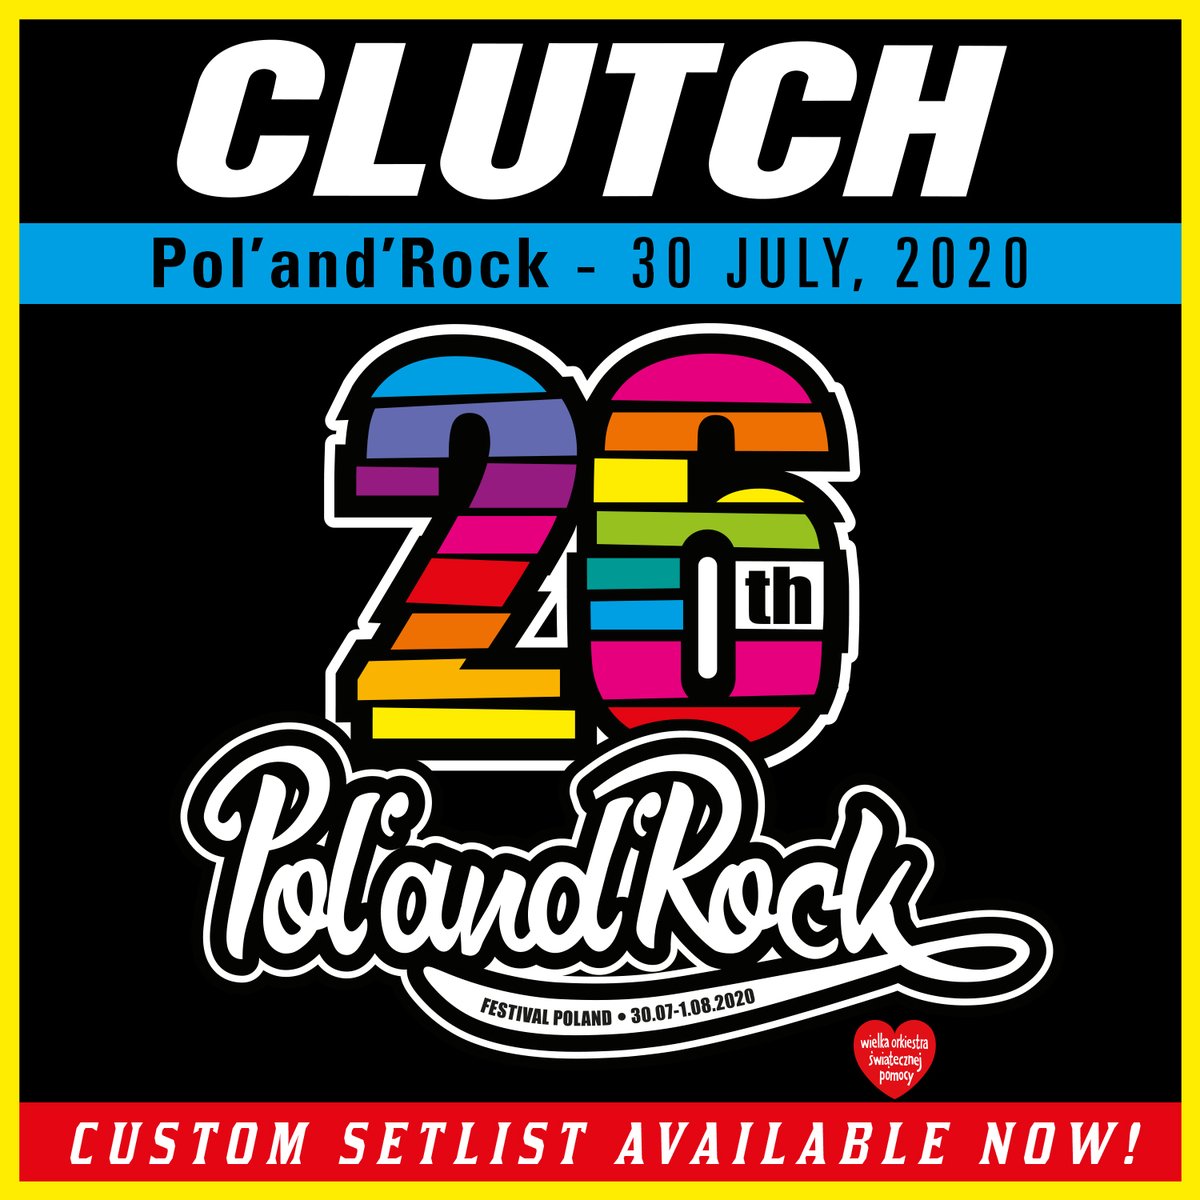 July 30th, 2020 – On this day today Clutch would have played one of the largest rock festivals in Europe, the Pol'And'Rock Festival in Kostrzyn, Poland where hundreds of thousands of festival-goers gather every year. Check out the playlist here: spoti.fi/3gcgeBZ